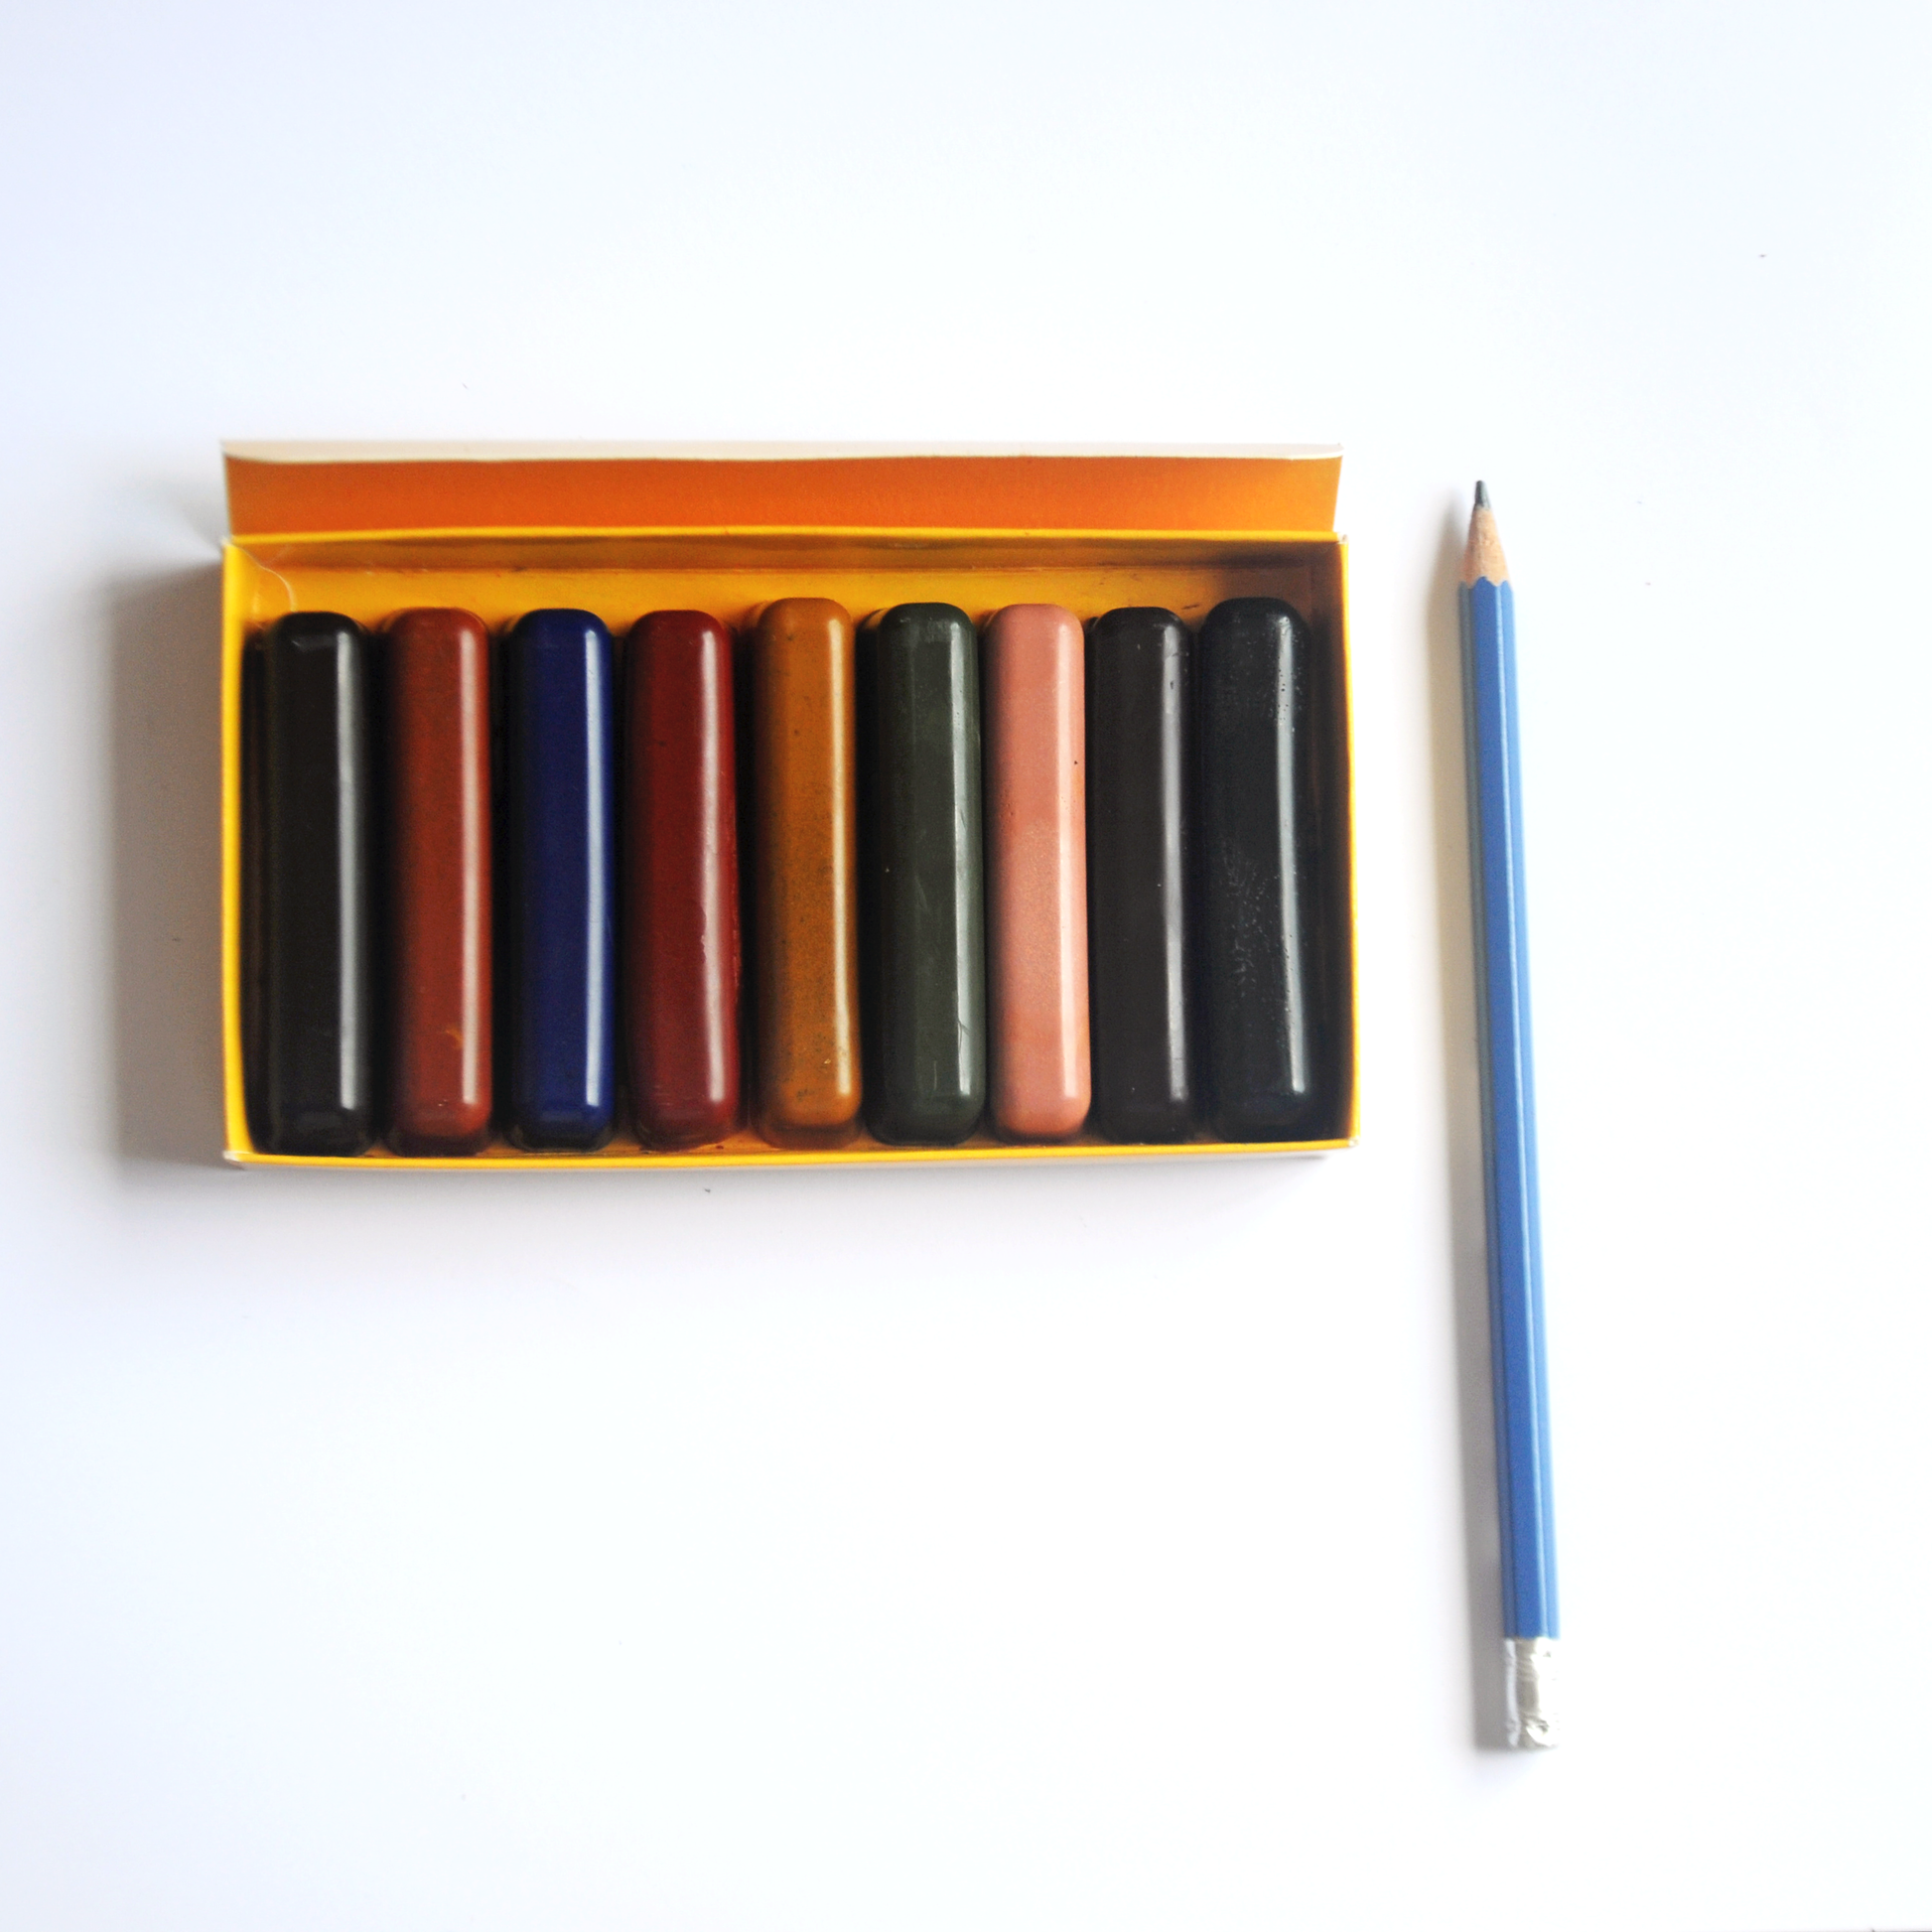 Non-Toxic Handmade Beeswax Crayon Fingers In Open Box